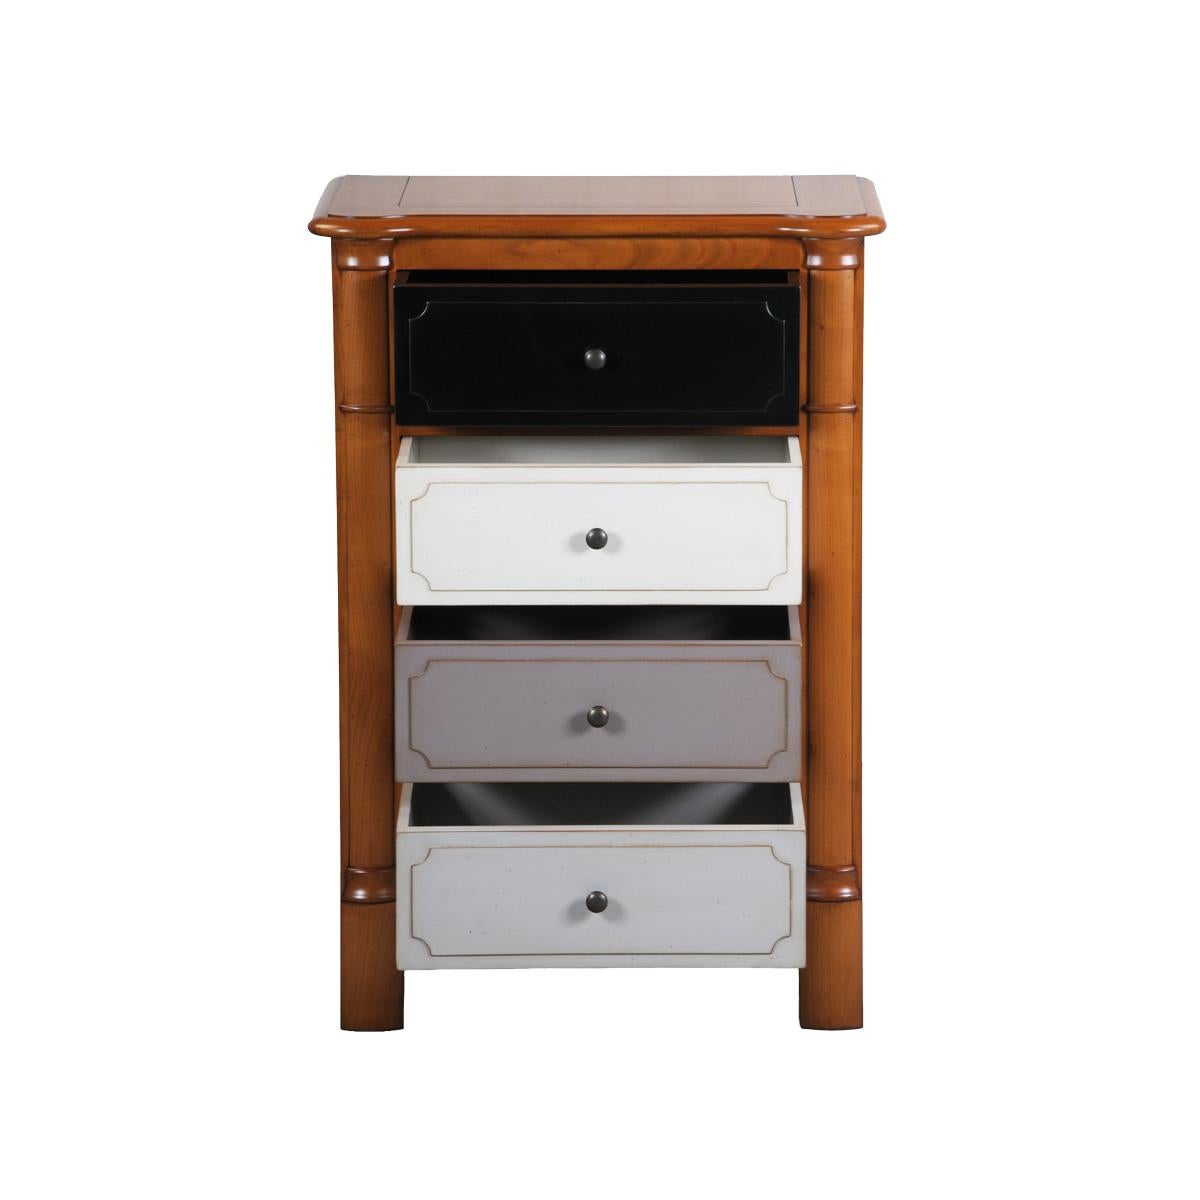 This Chiffonier belongs to our TRADITION collection, which takes its  design and inspiration from the French countryside 